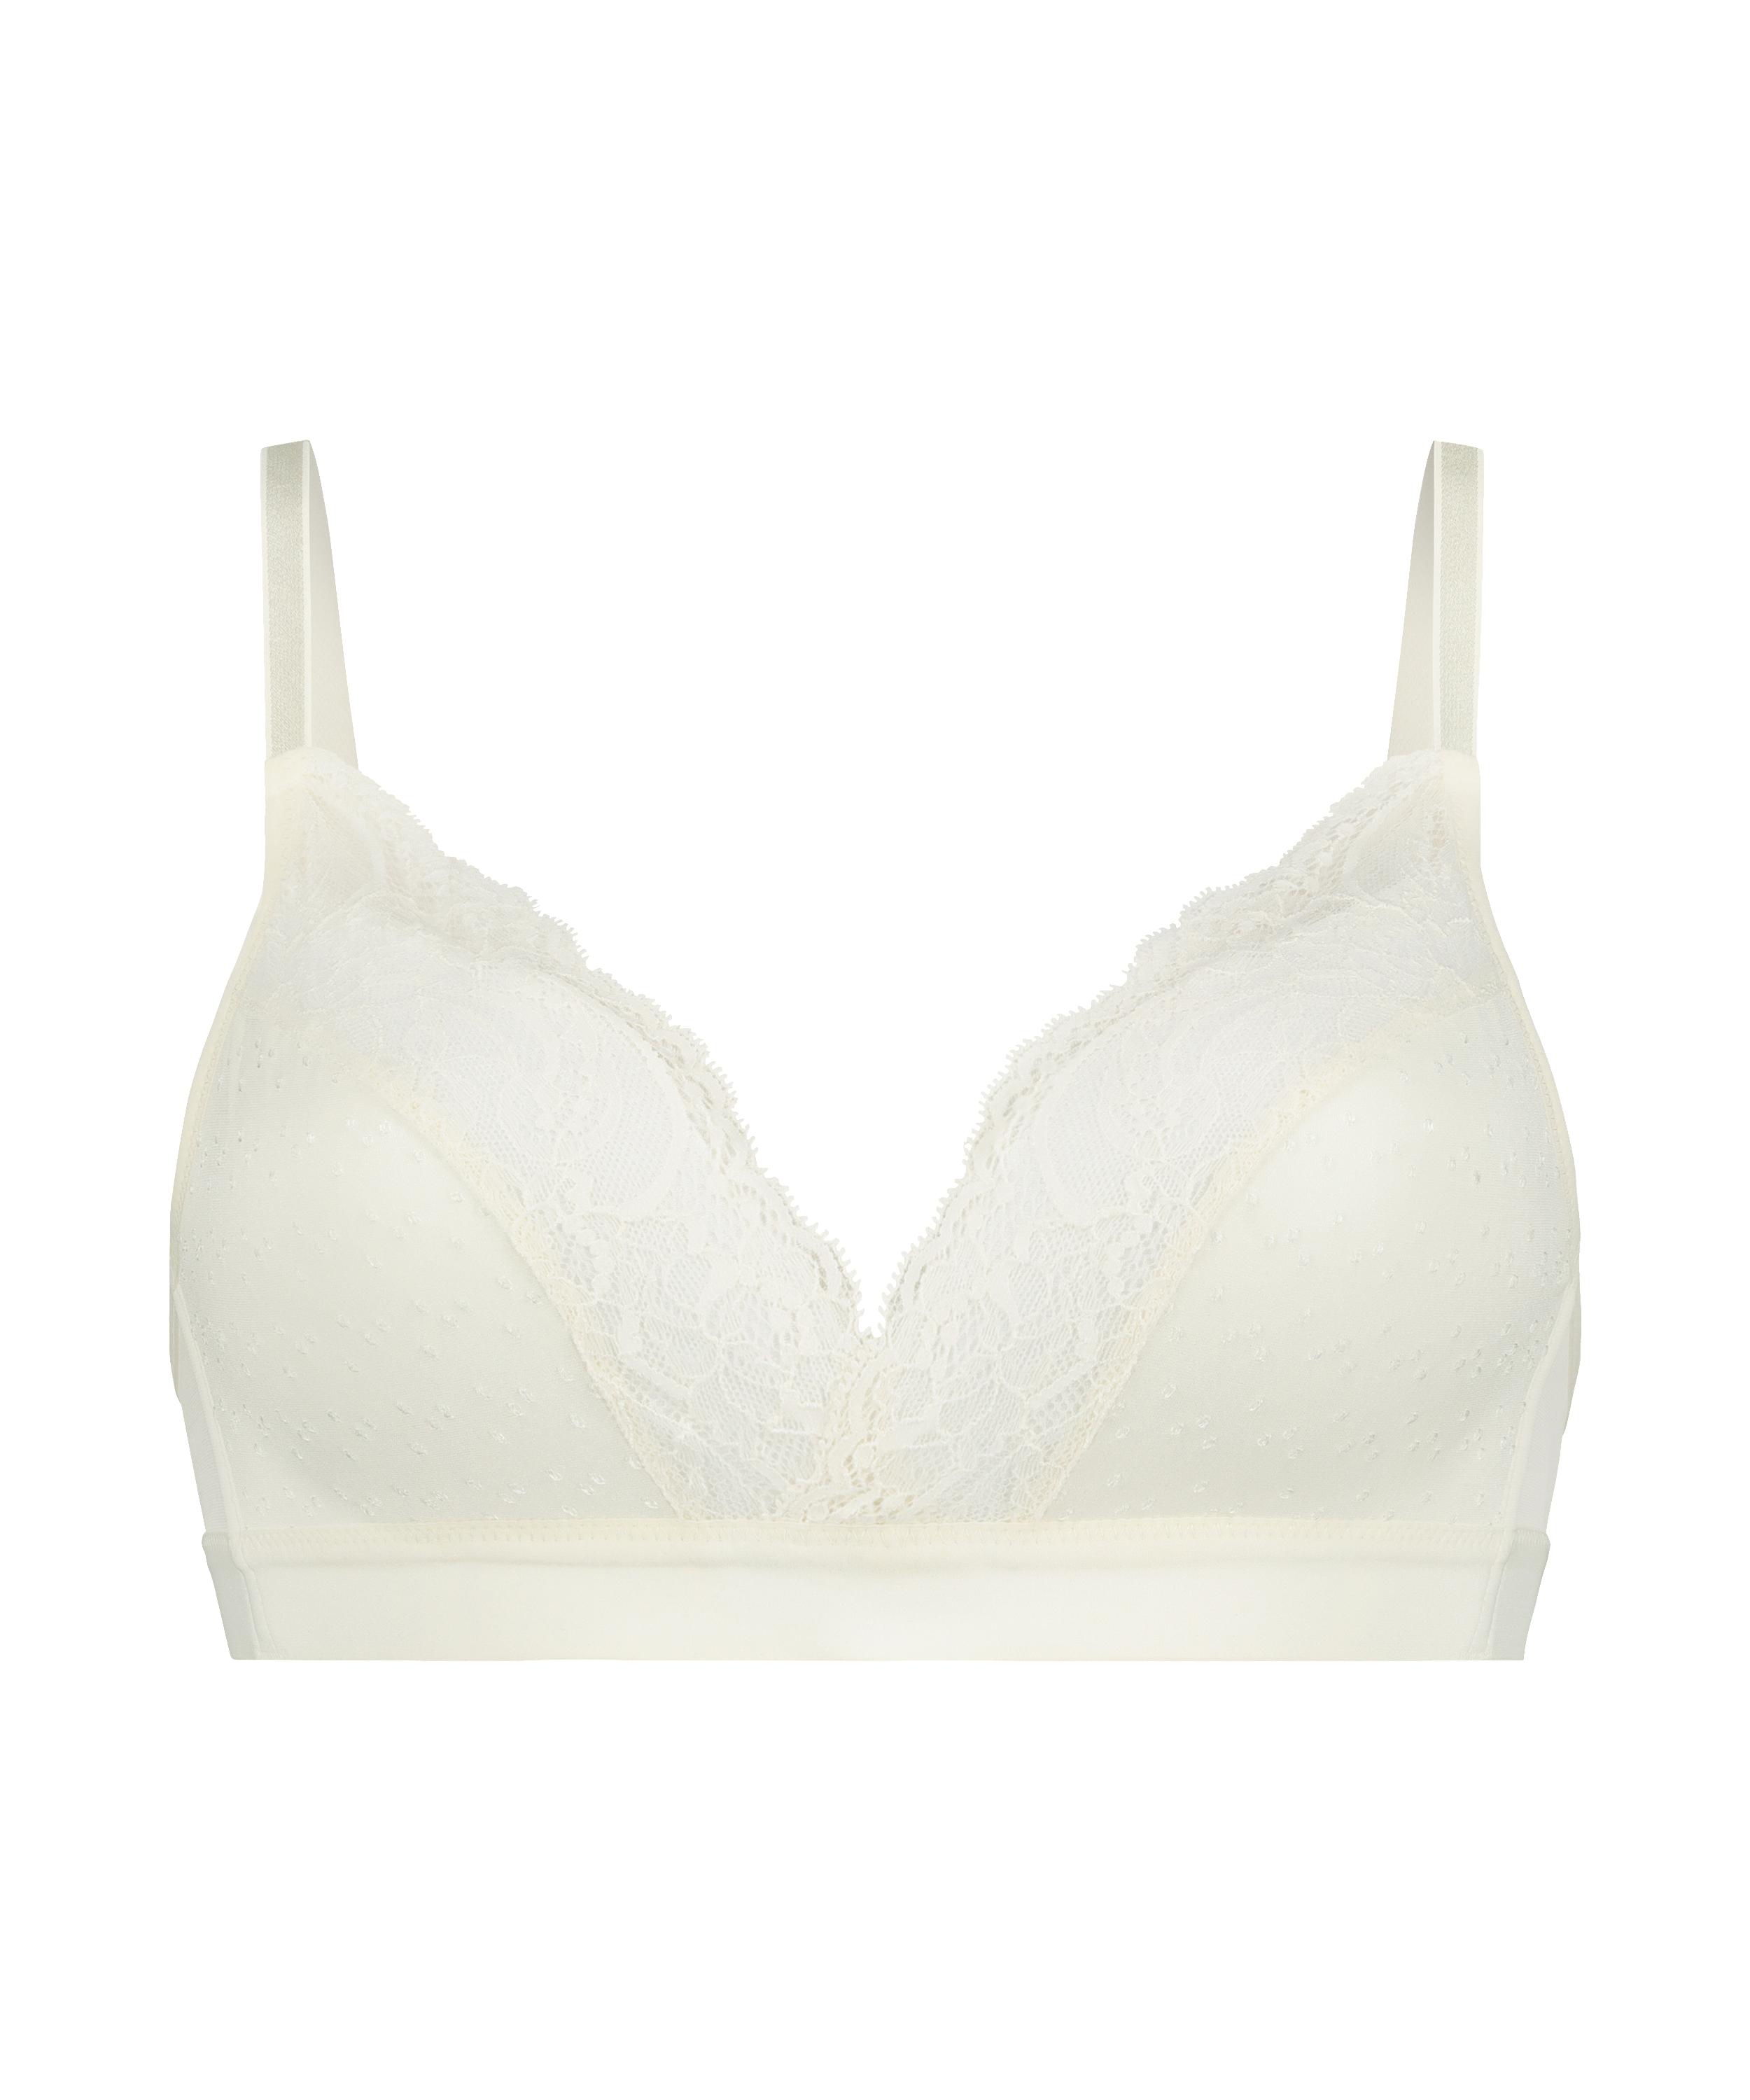 Sophie Padded Non-wired Bra, White, main